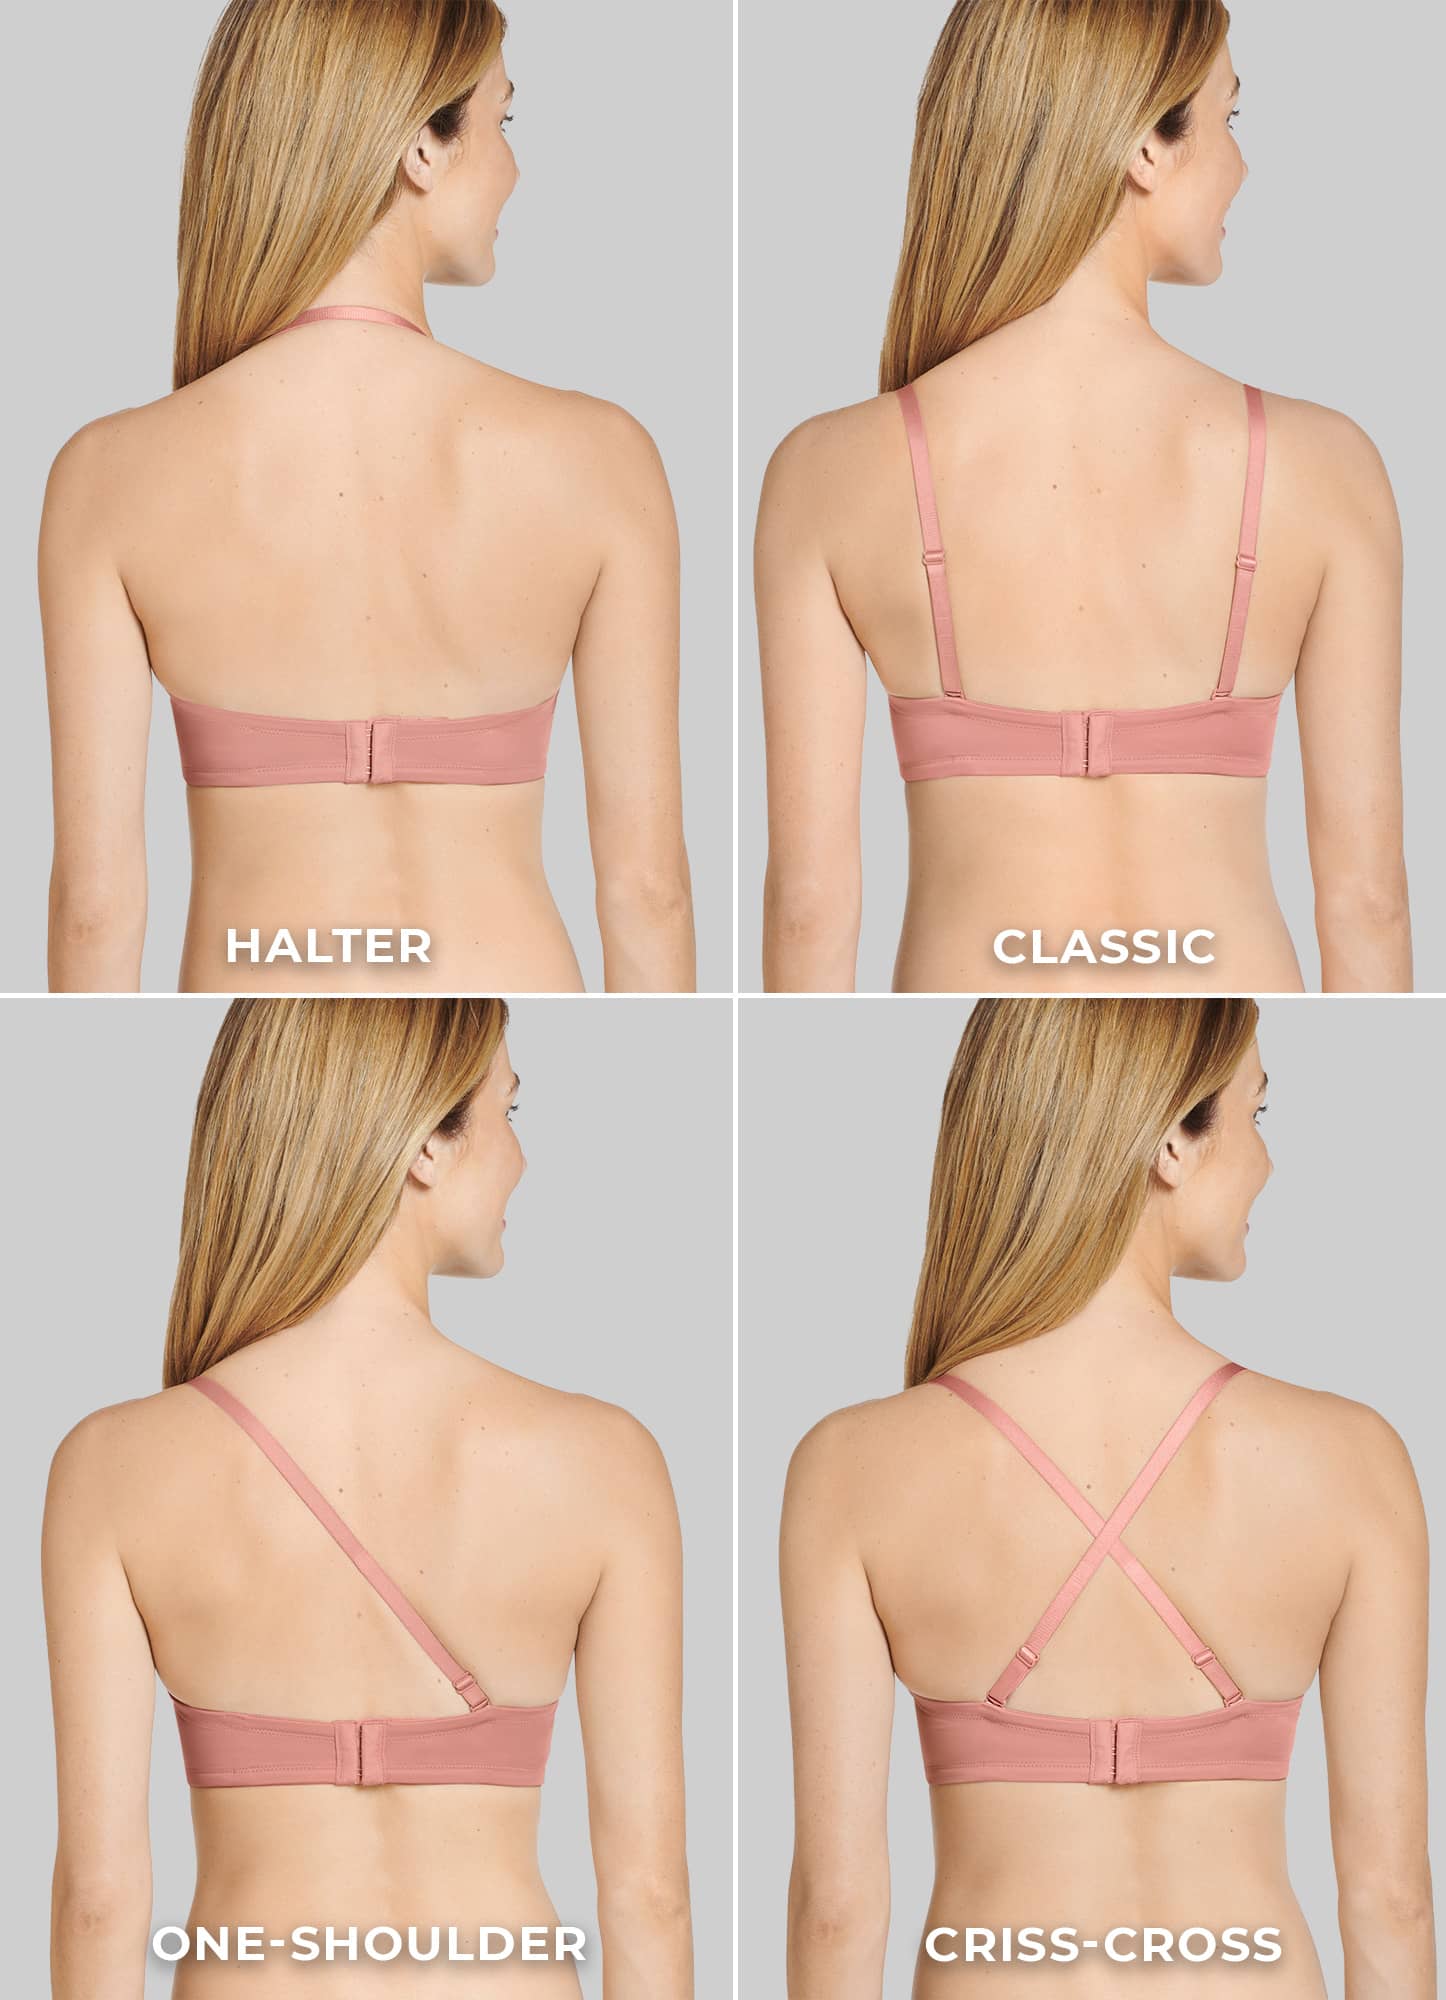 Jockey Woman: Bras for every mood and moment 